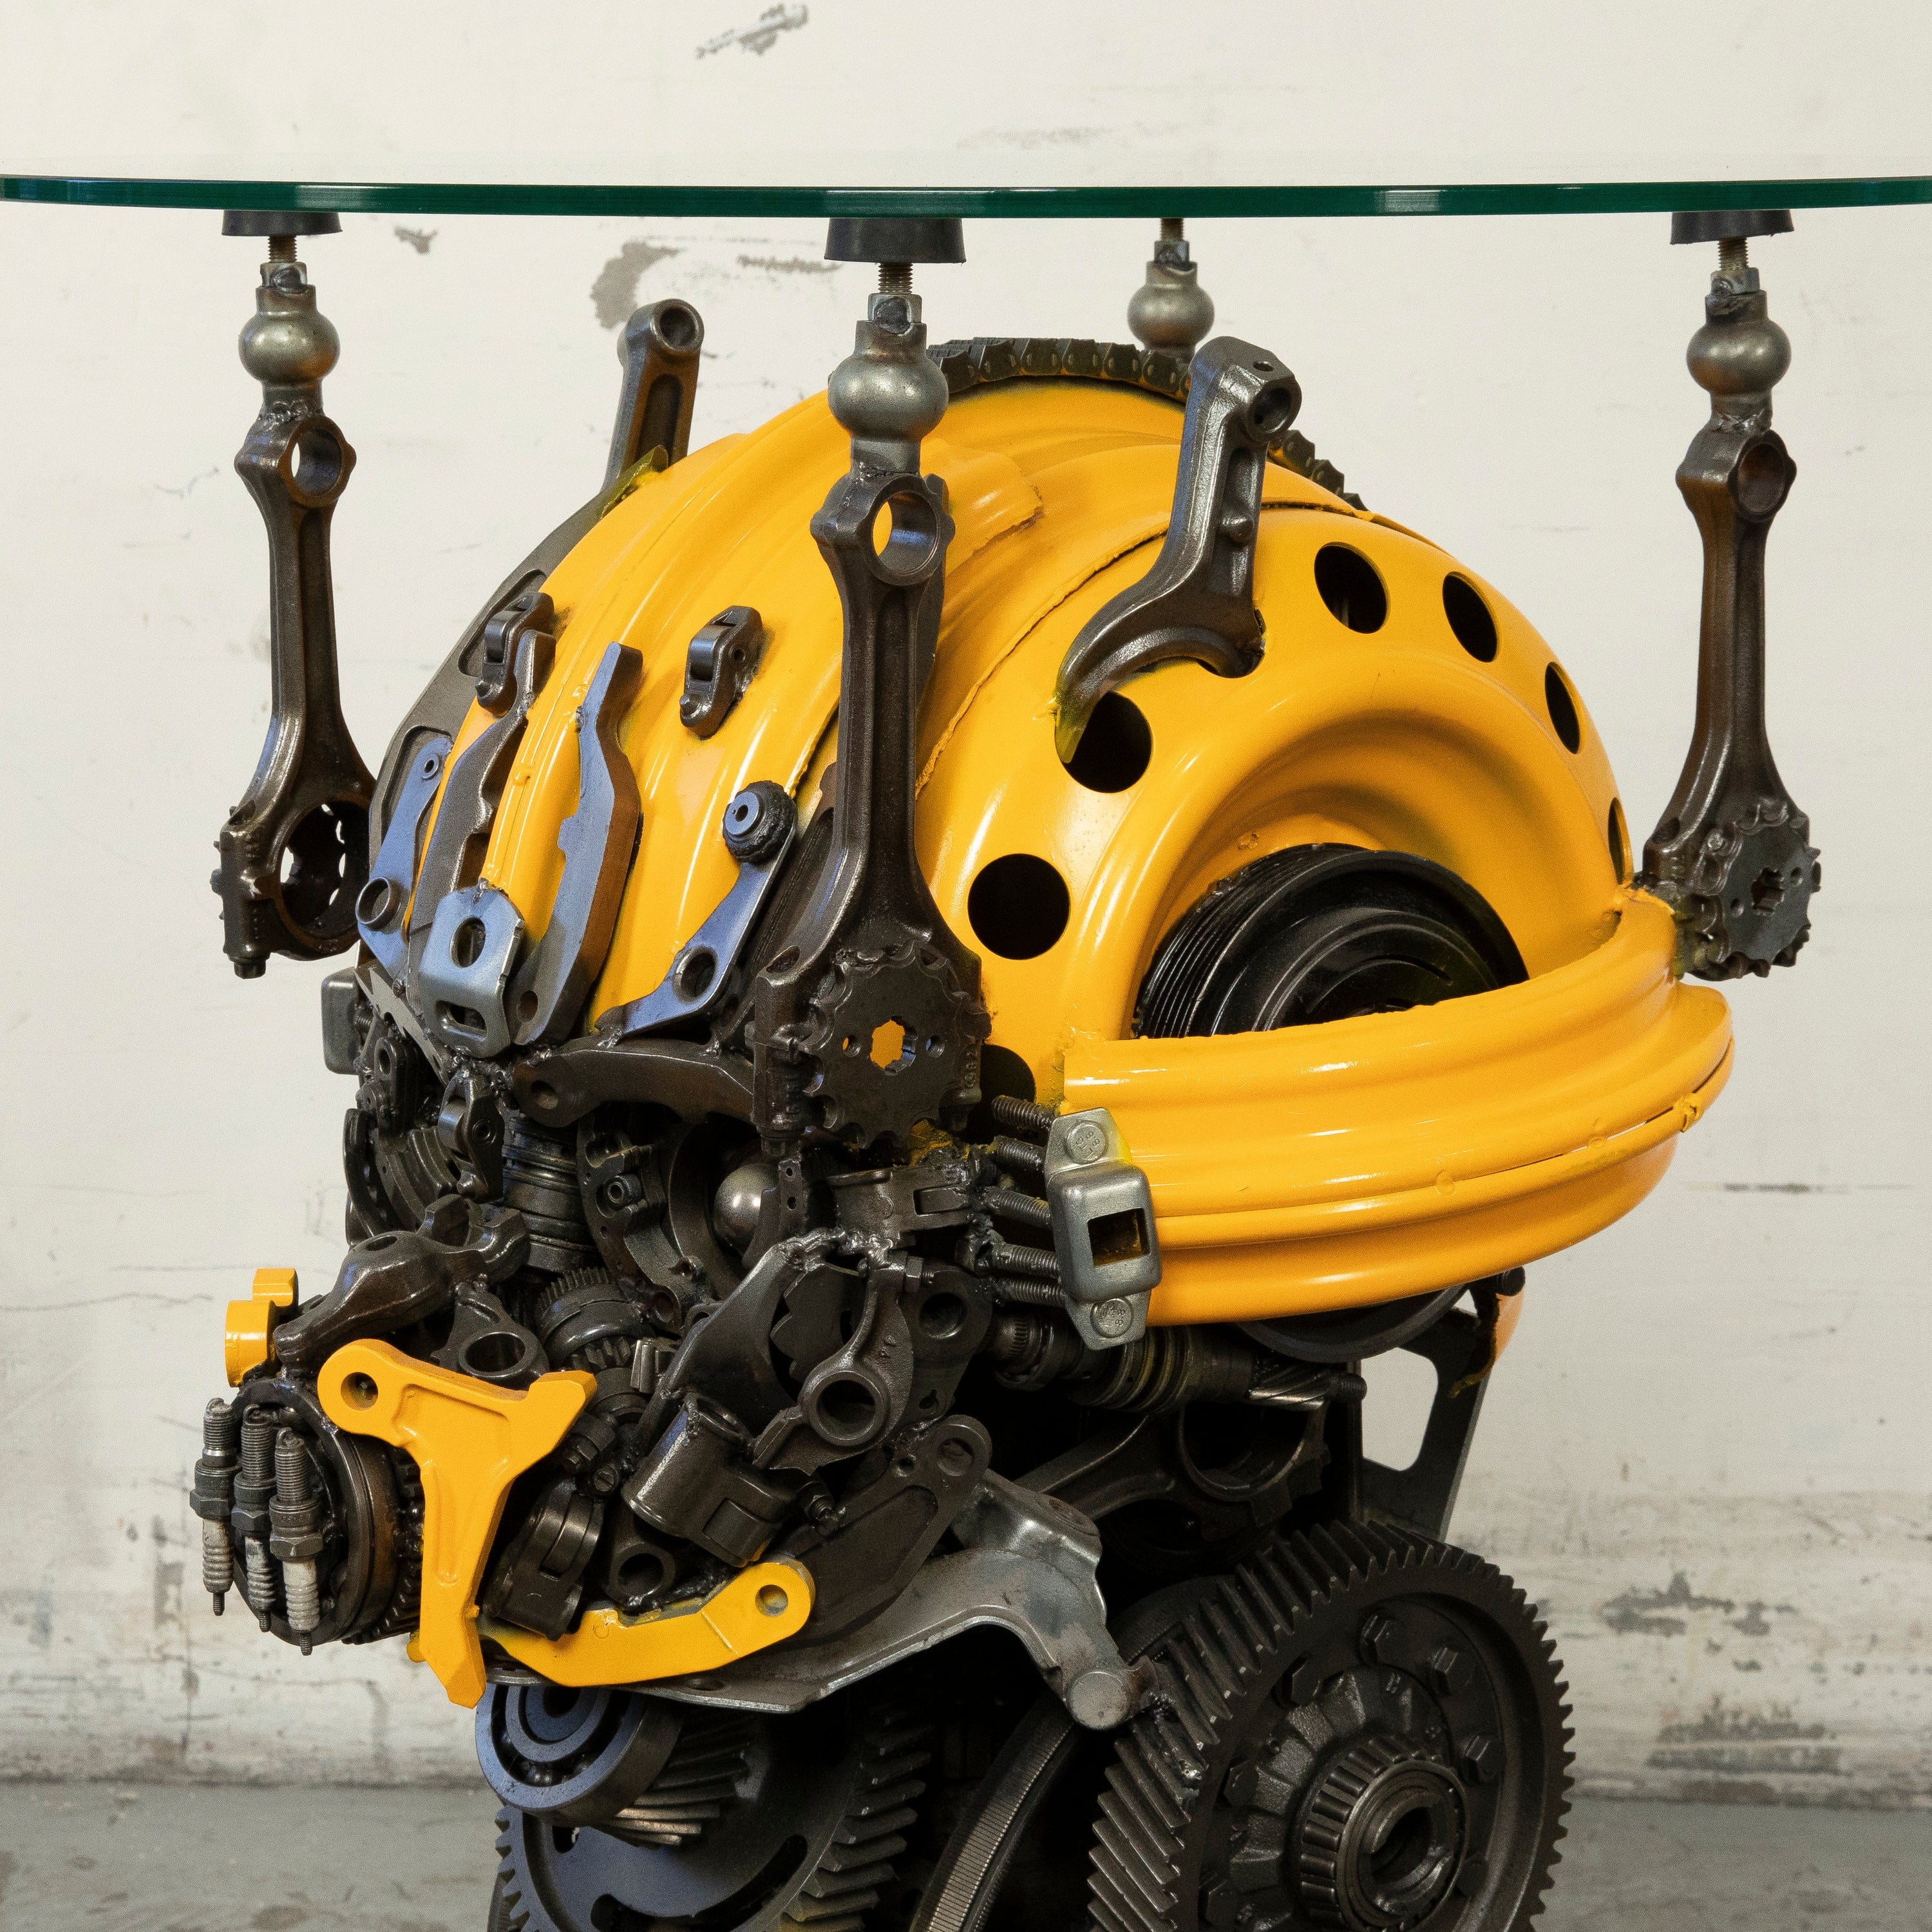 Kalifano Recycled Metal Art 36" Bumblebee Inspired Recycled Metal Sculpture Table RMS-BBTAB90-S04